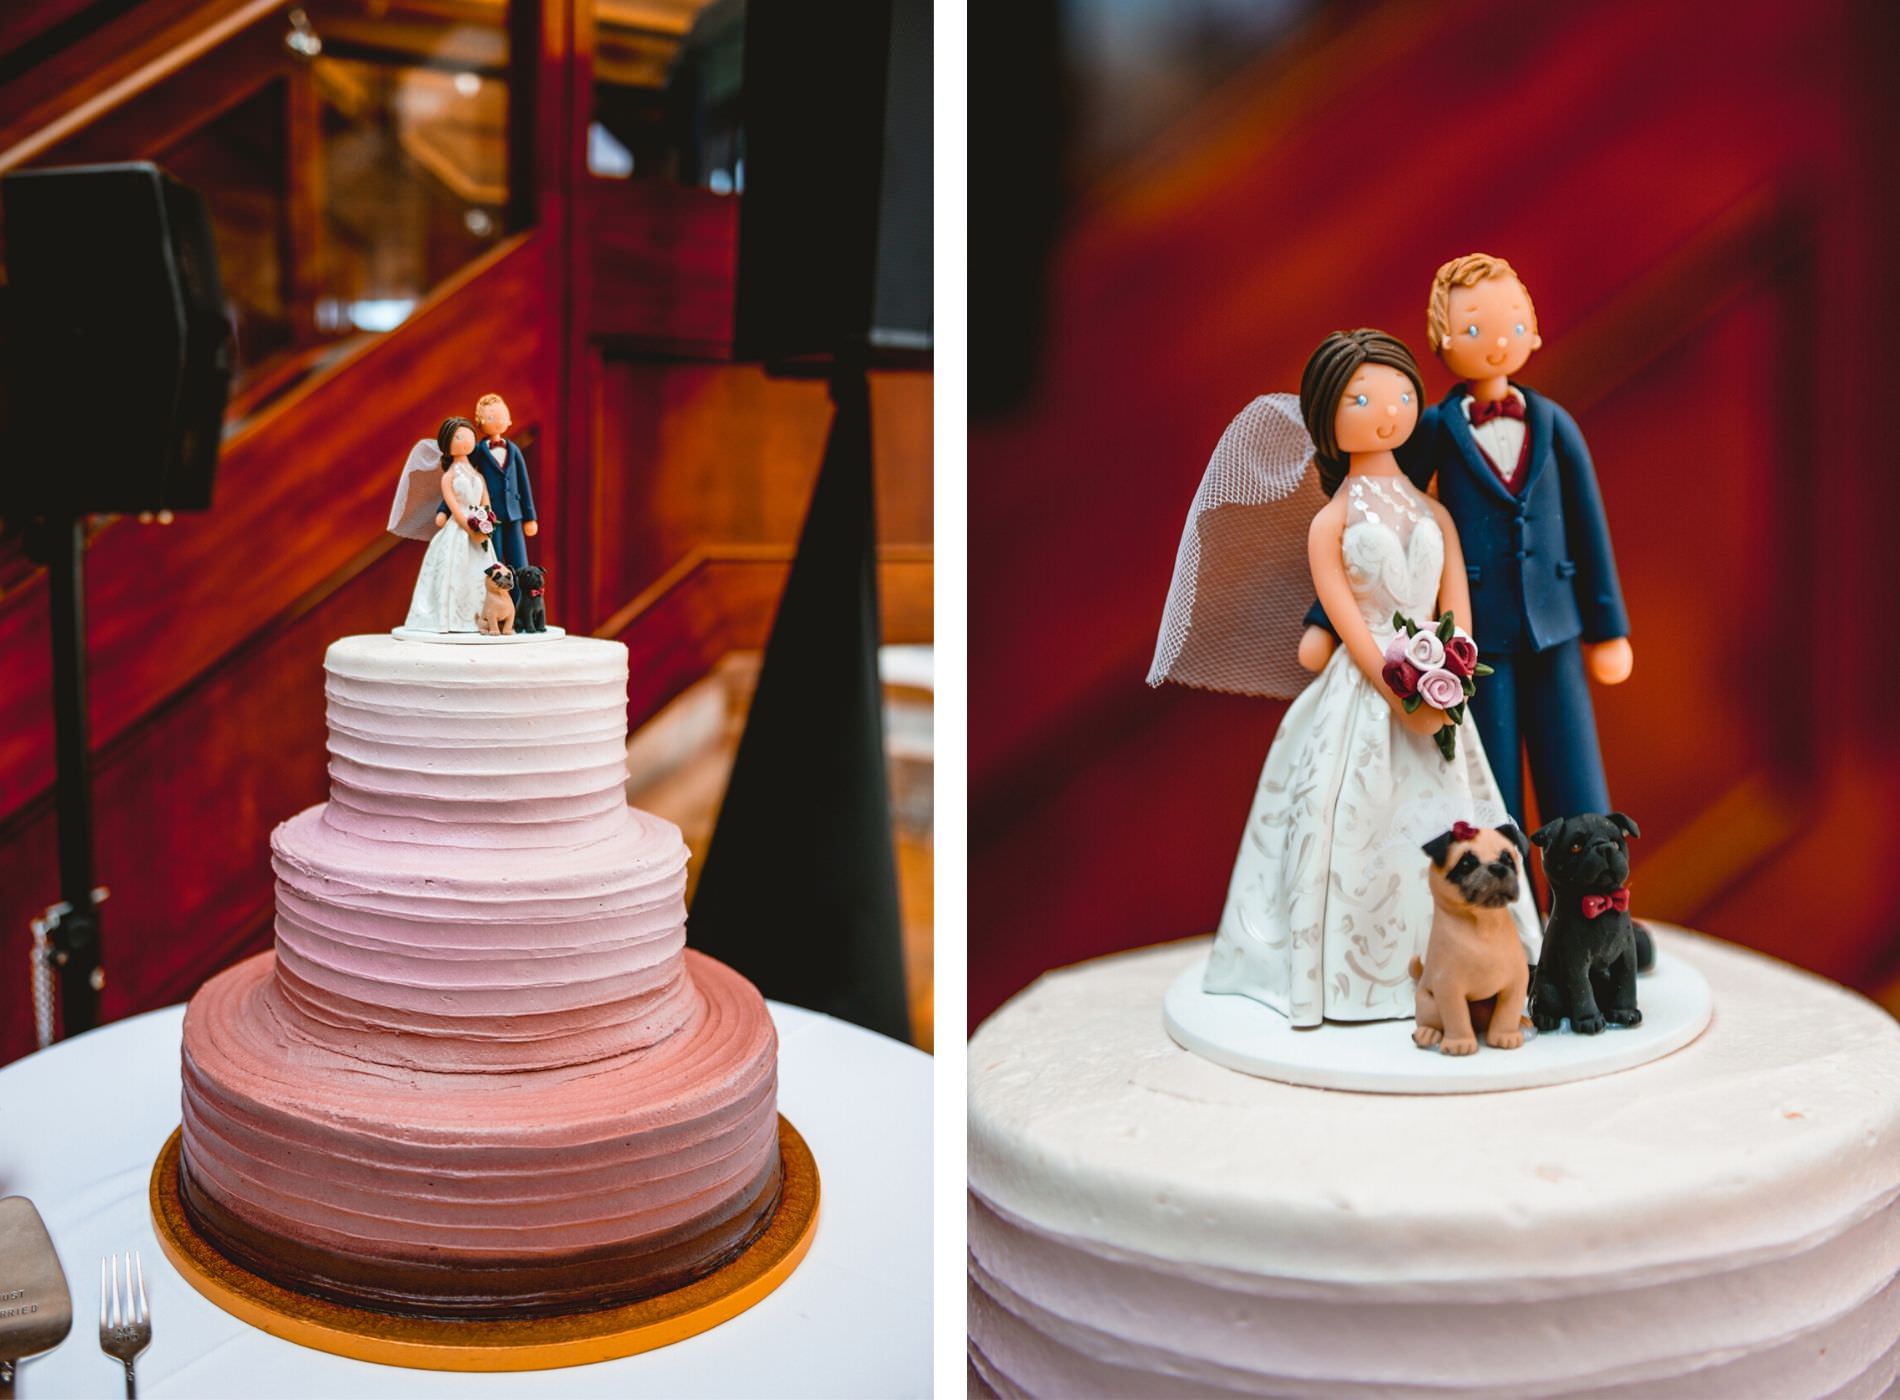 Three Tier Round Ombre Maroon Berry Blush Pink Buttercream Wedding Cake with Custom Clay Figure Cake Topper of Bride and Groom and Pet Pug Dogs